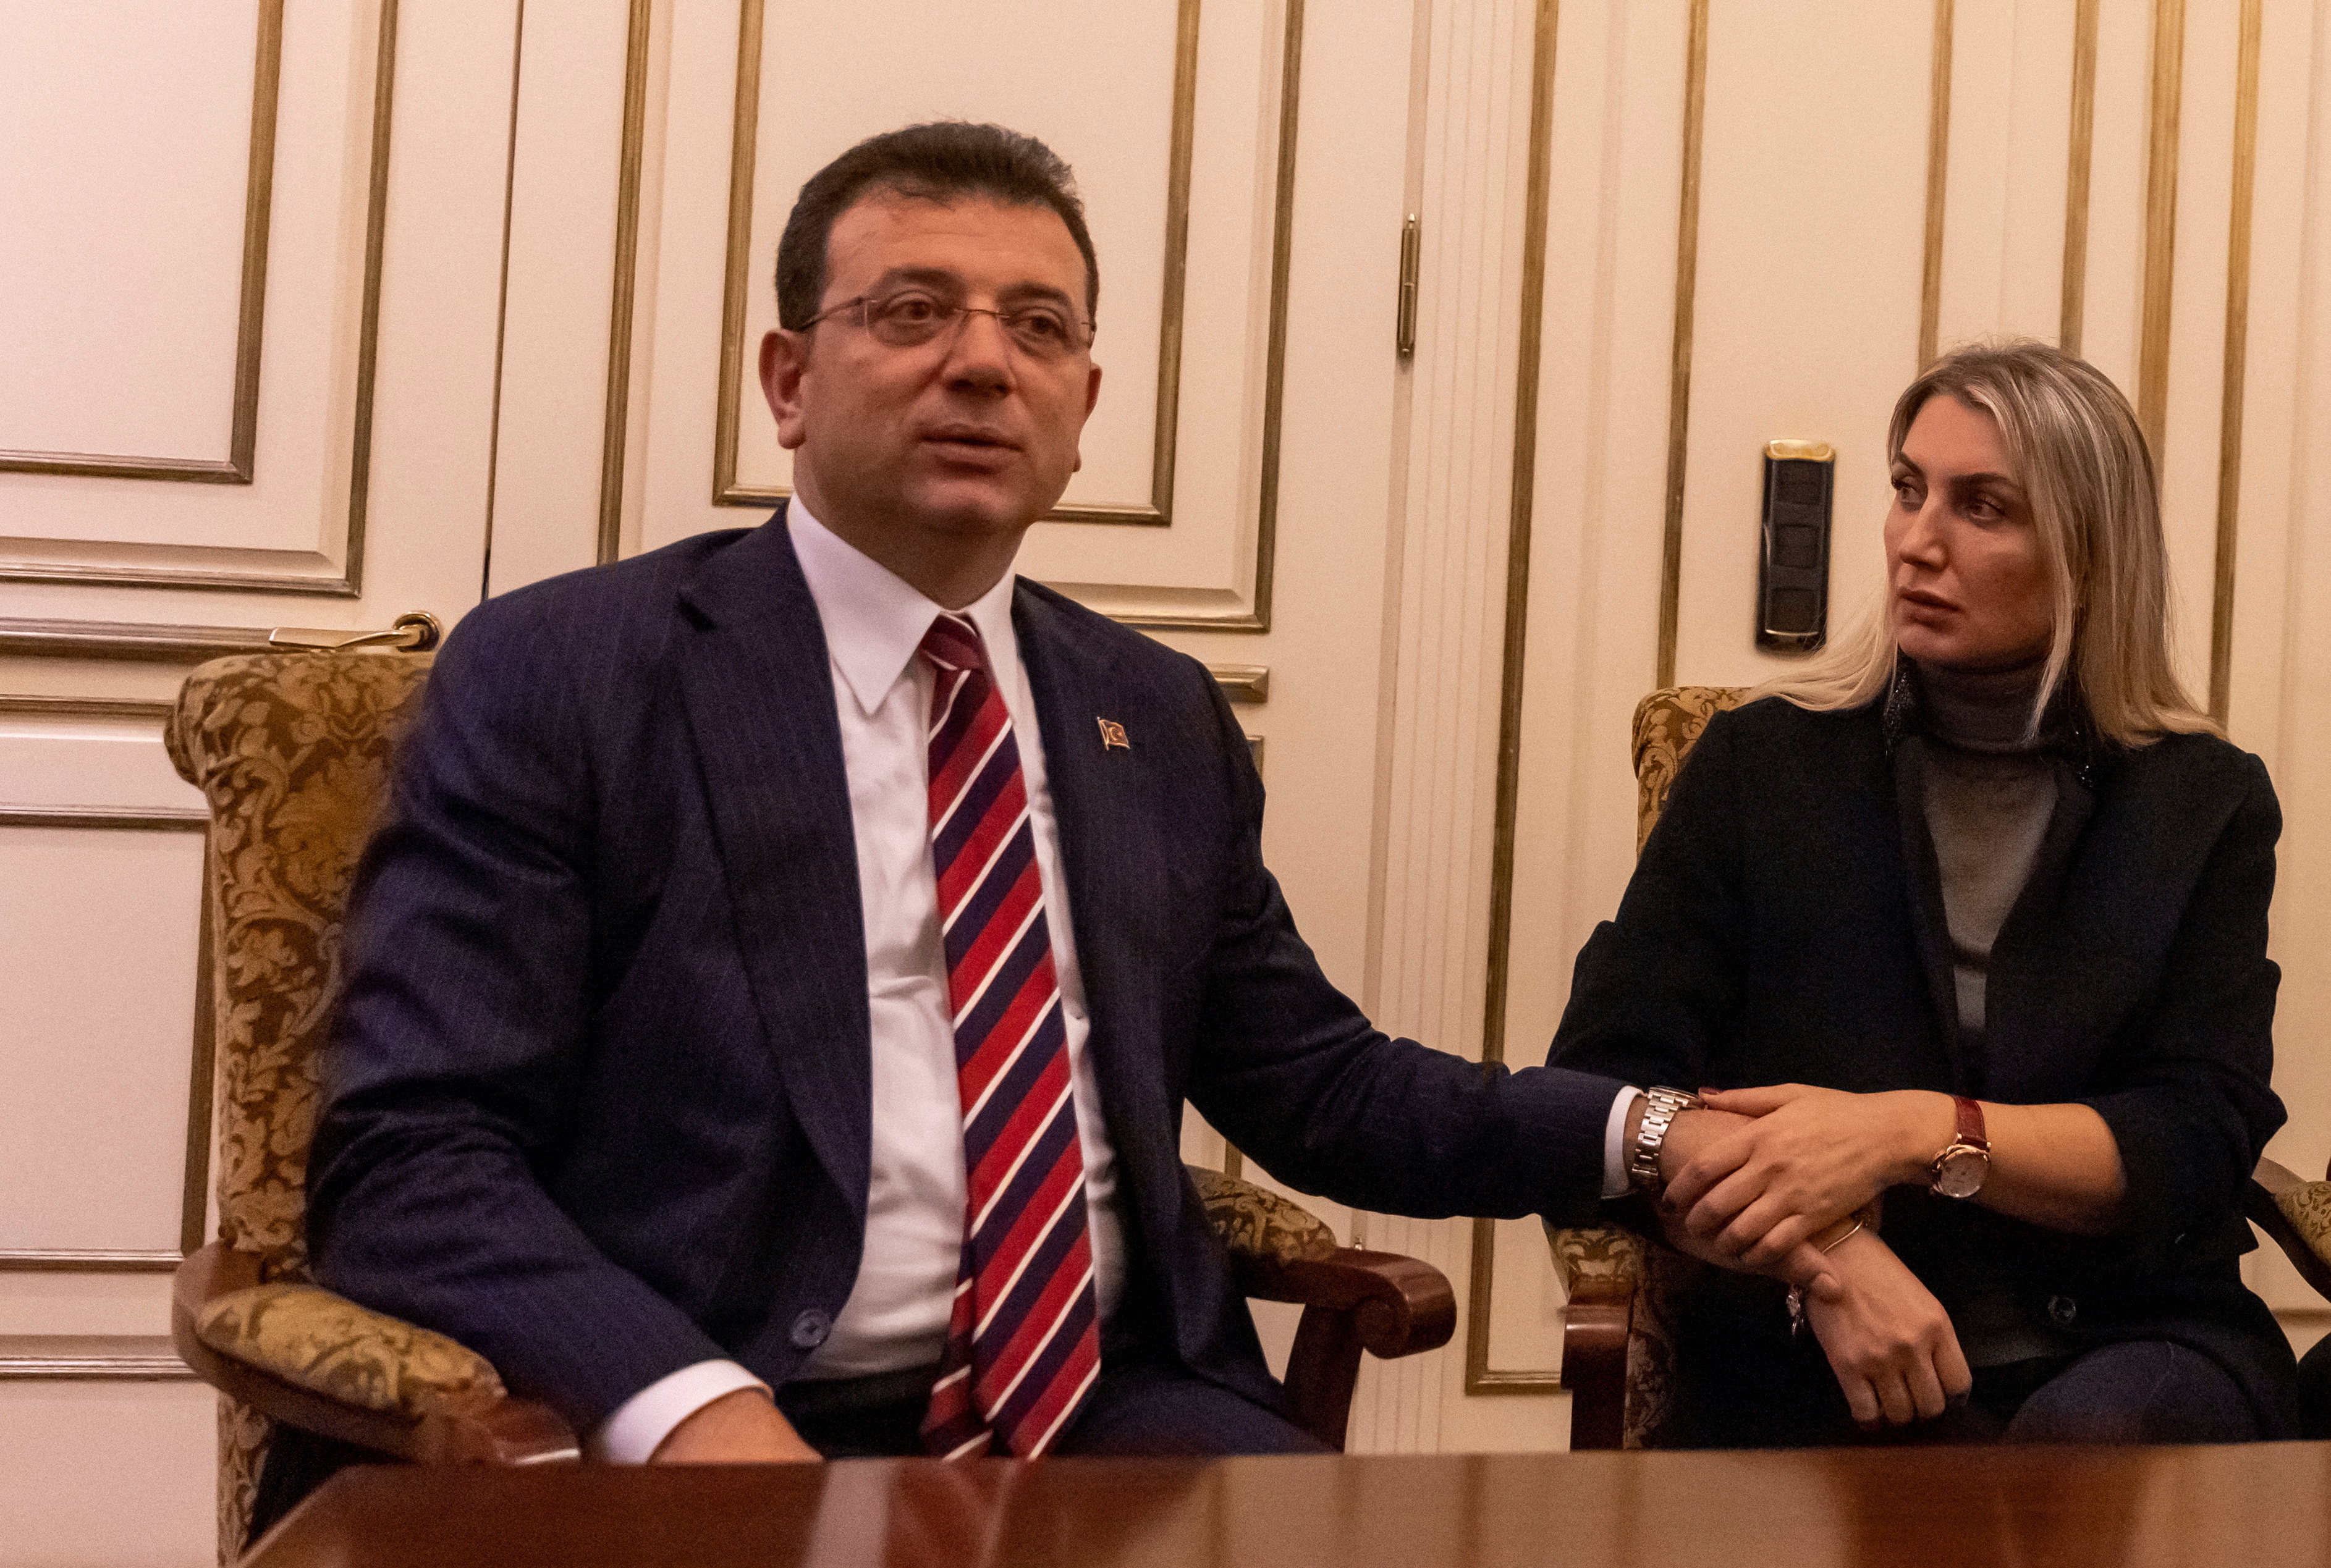 Istanbul Mayor Ekrem Imamoglu and his wife Dilek are sitting in his office in Istanbul